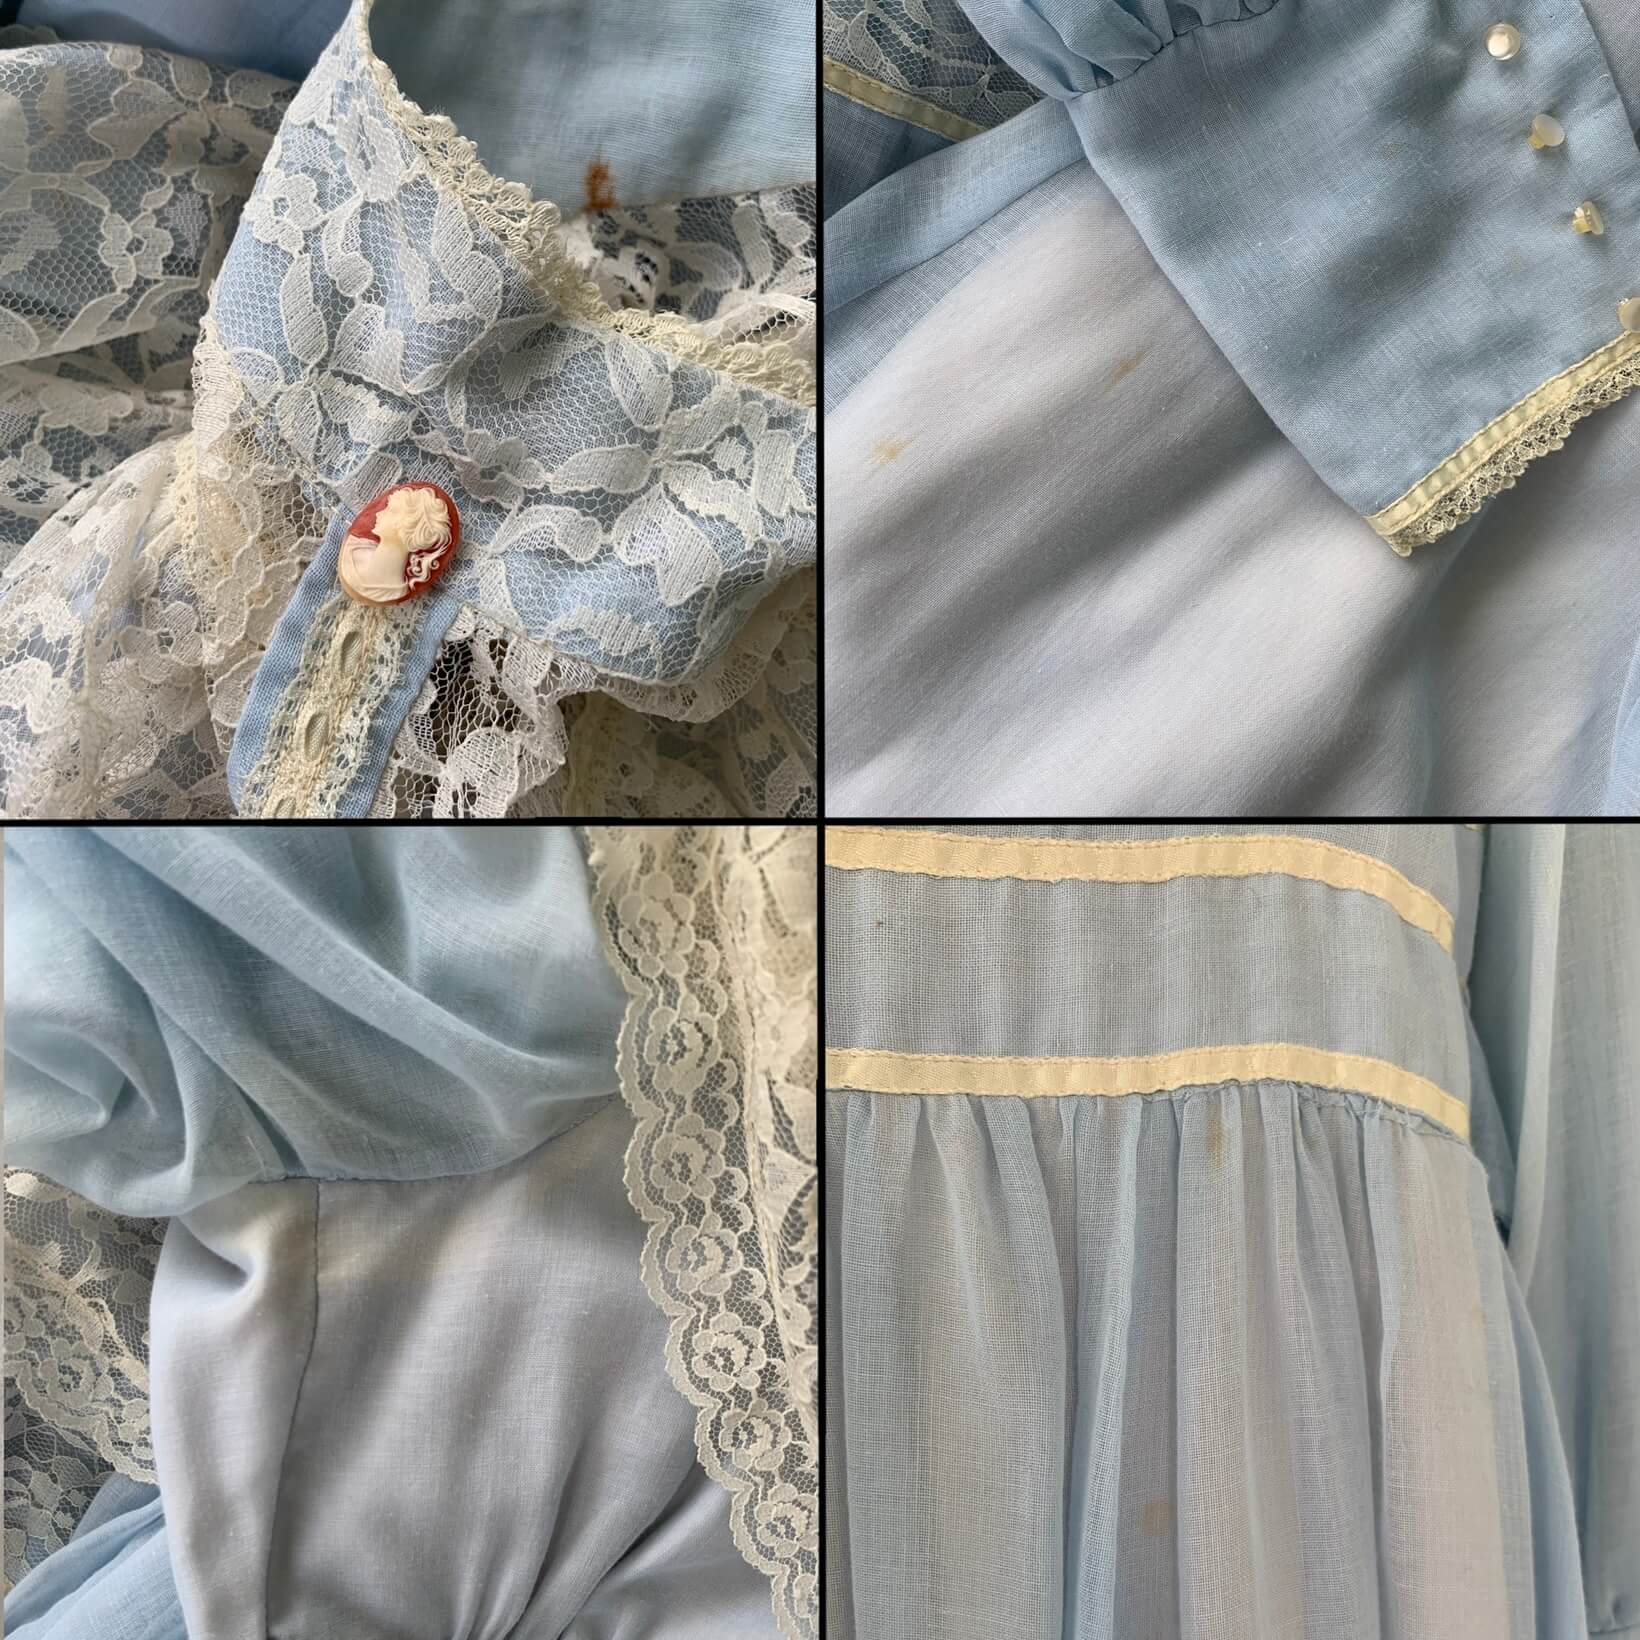 wear details on the blue dress divided into four sections